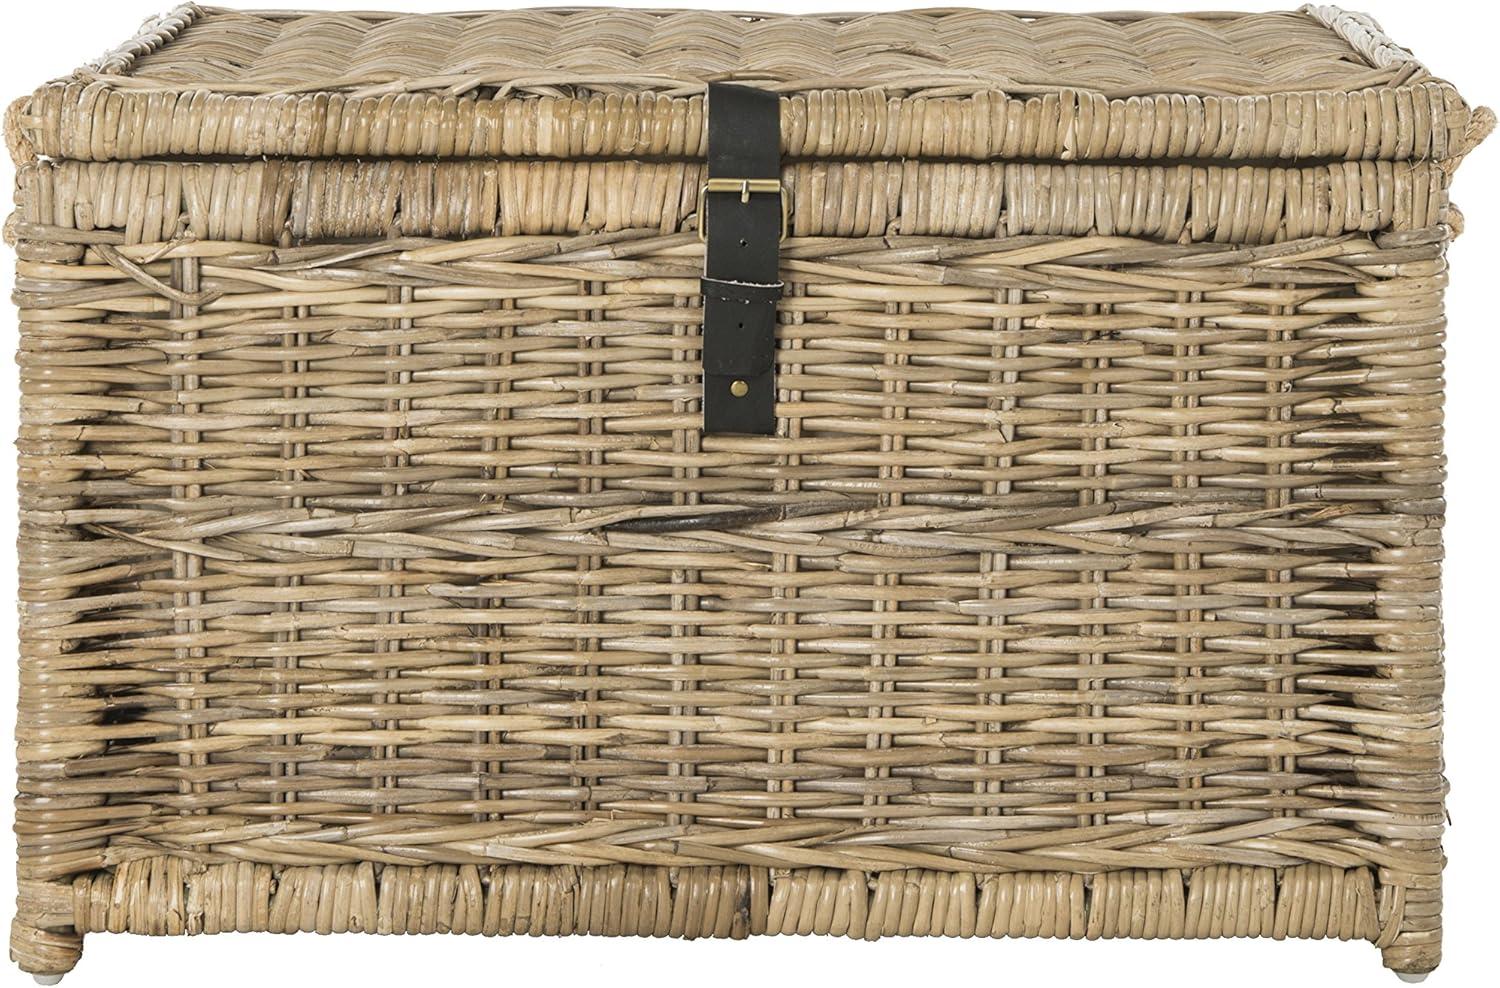 Natural Wicker and Leather Accented Storage Trunk